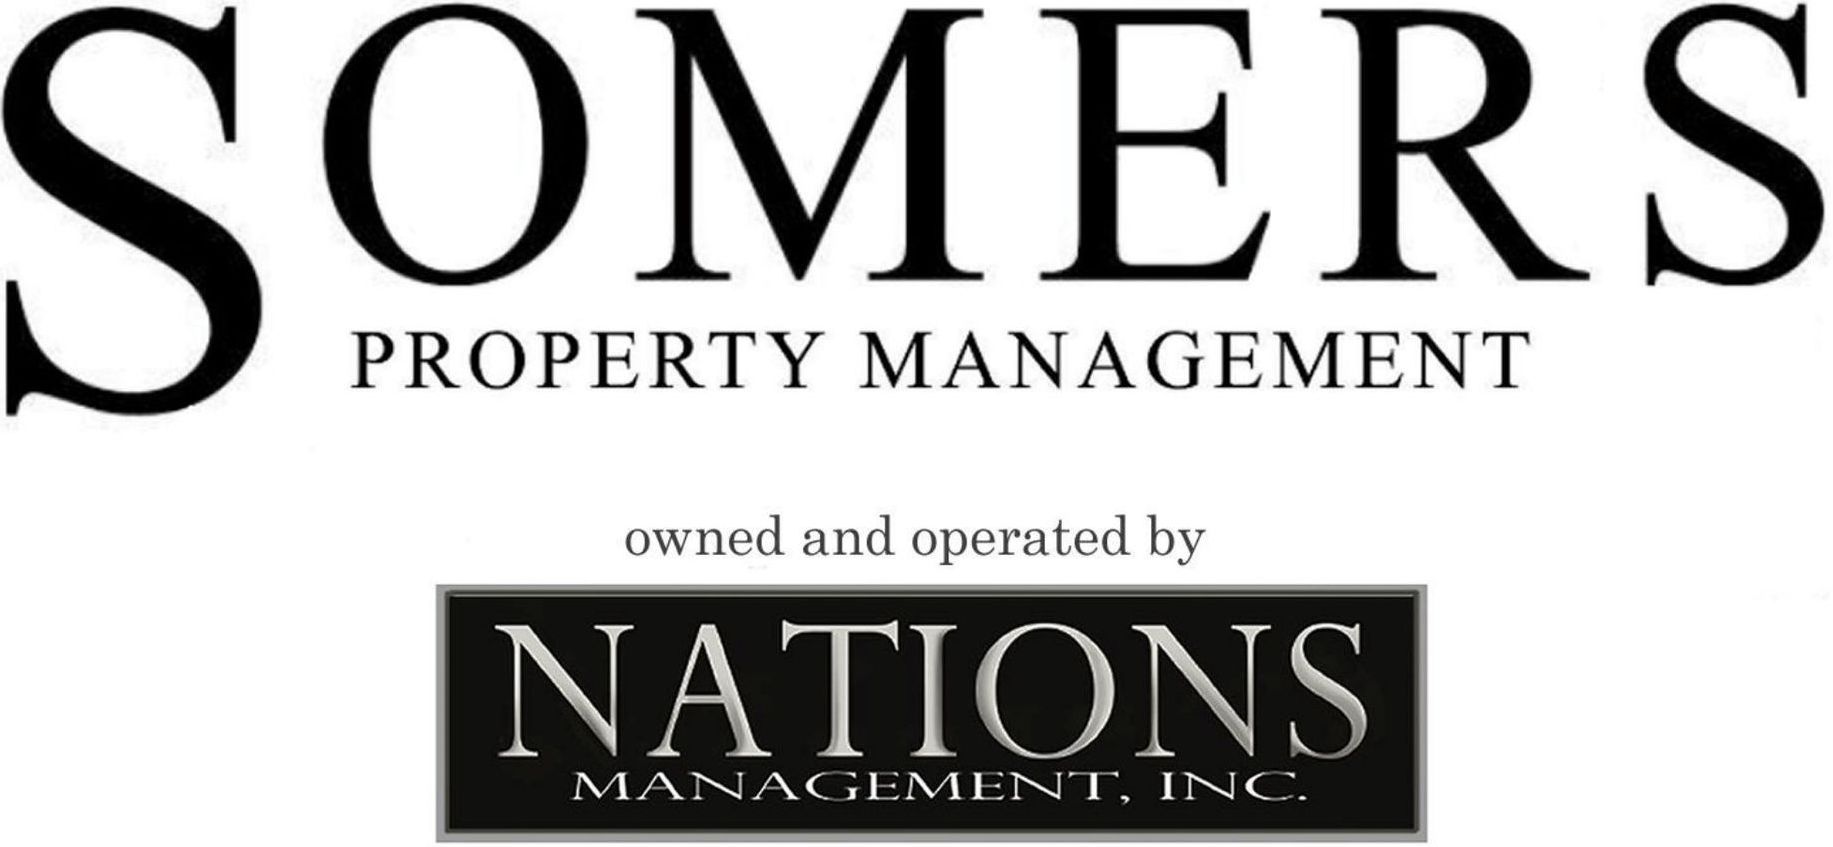 Nations Management, Inc dba Somers Property Management